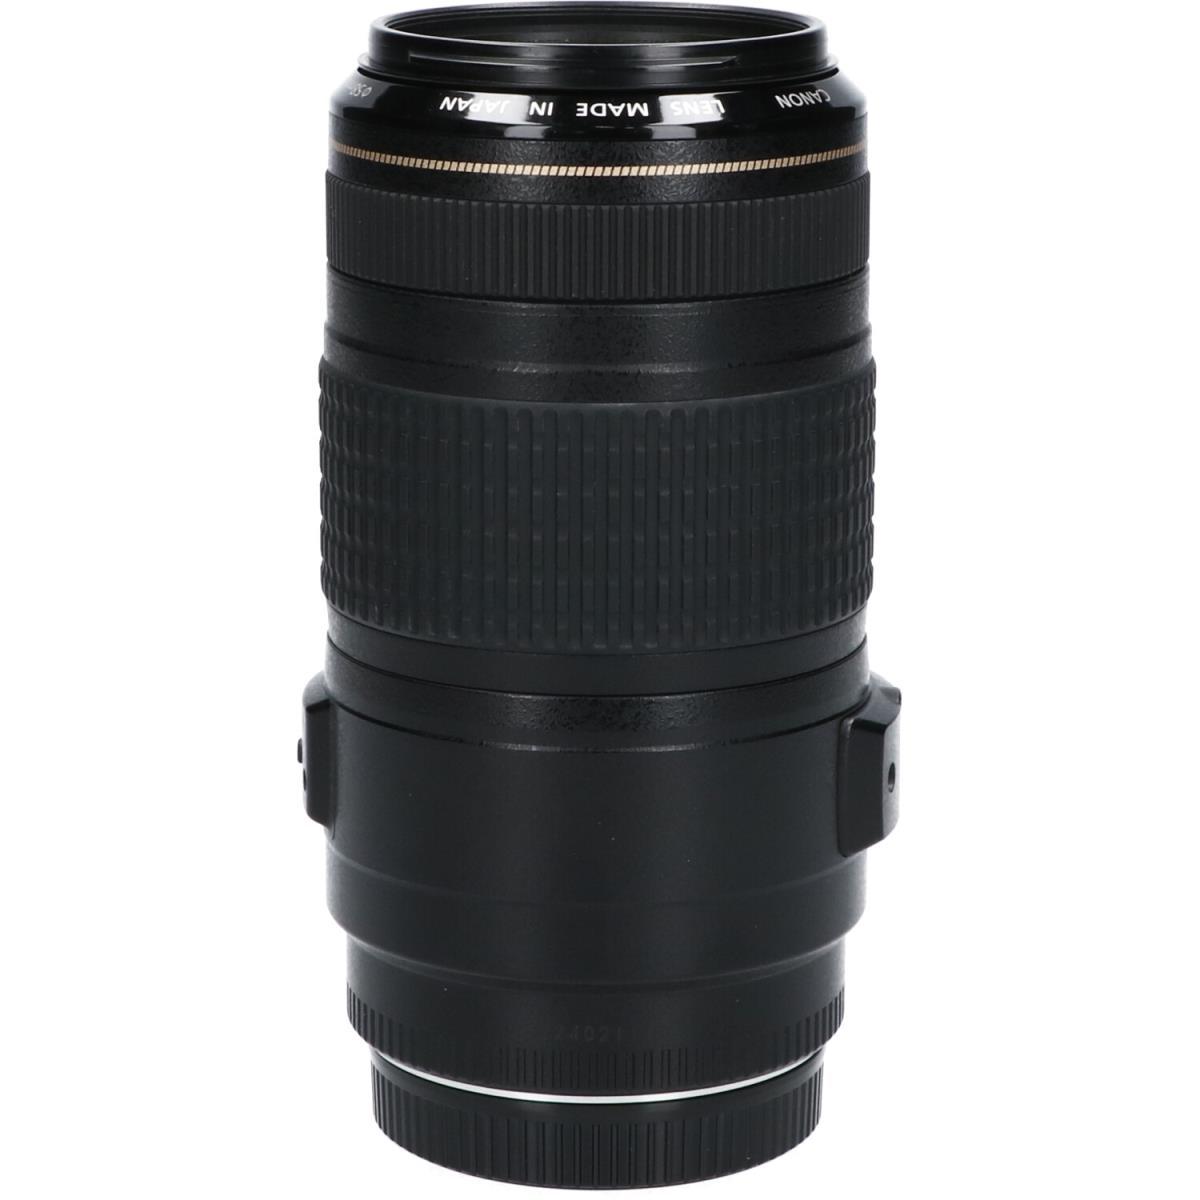 CANON EF70-300mm F4-5.6IS USM